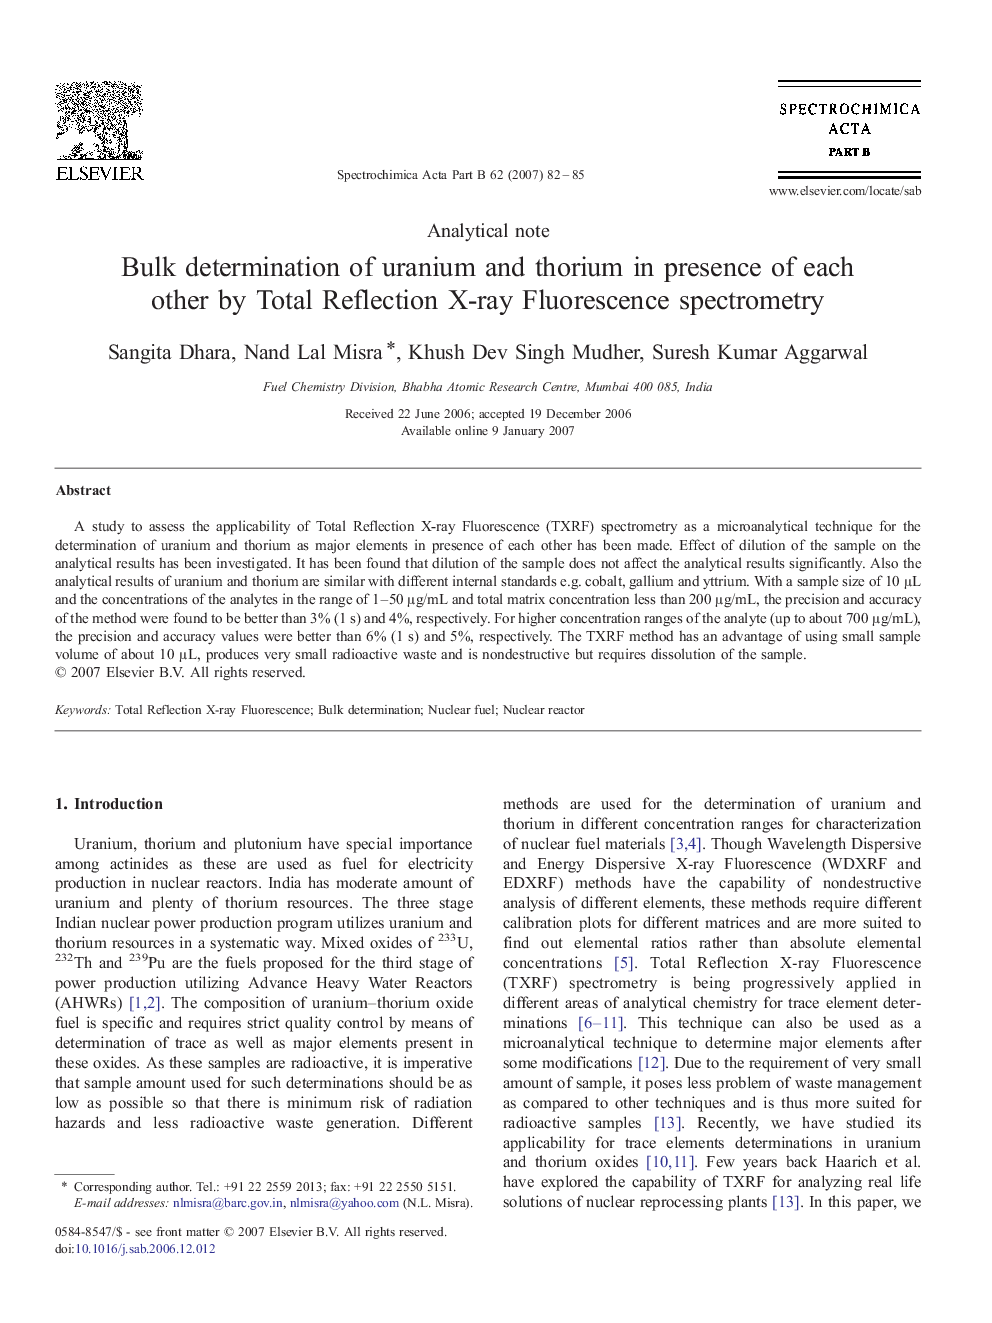 Bulk determination of uranium and thorium in presence of each other by Total Reflection X-ray Fluorescence spectrometry